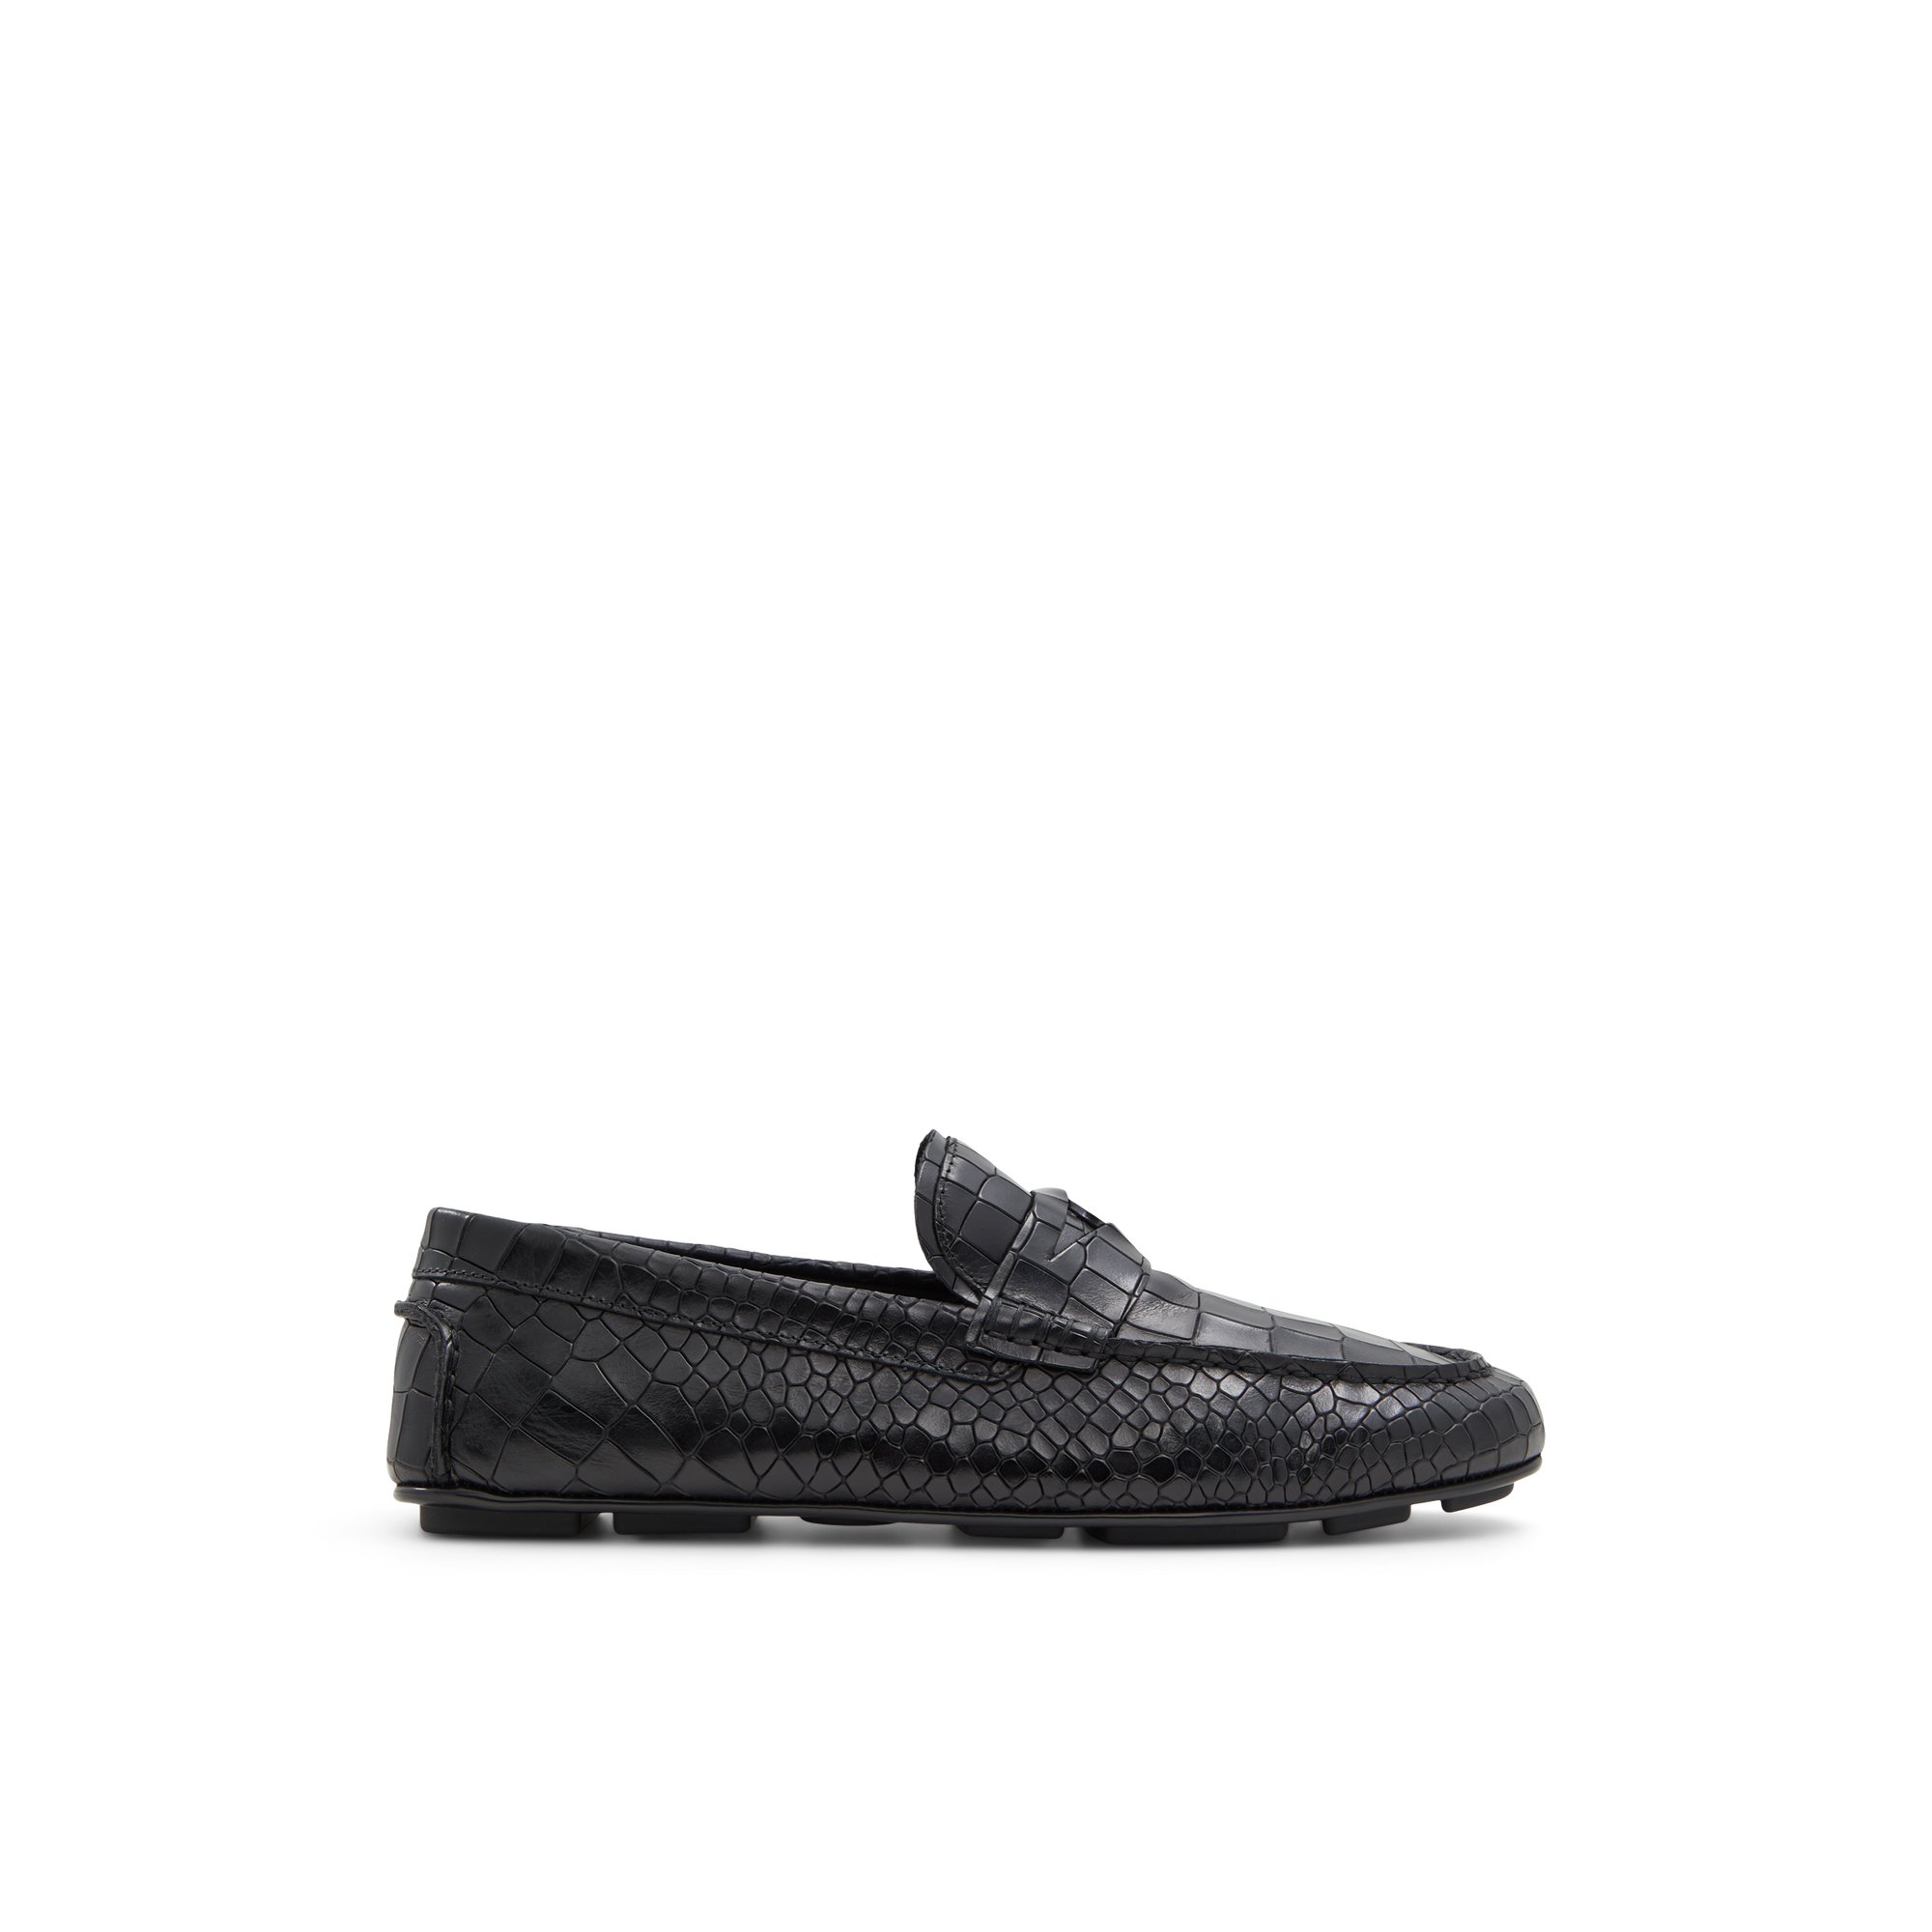 ALDO Squire - Men's Loafers and Slip Ons - Black